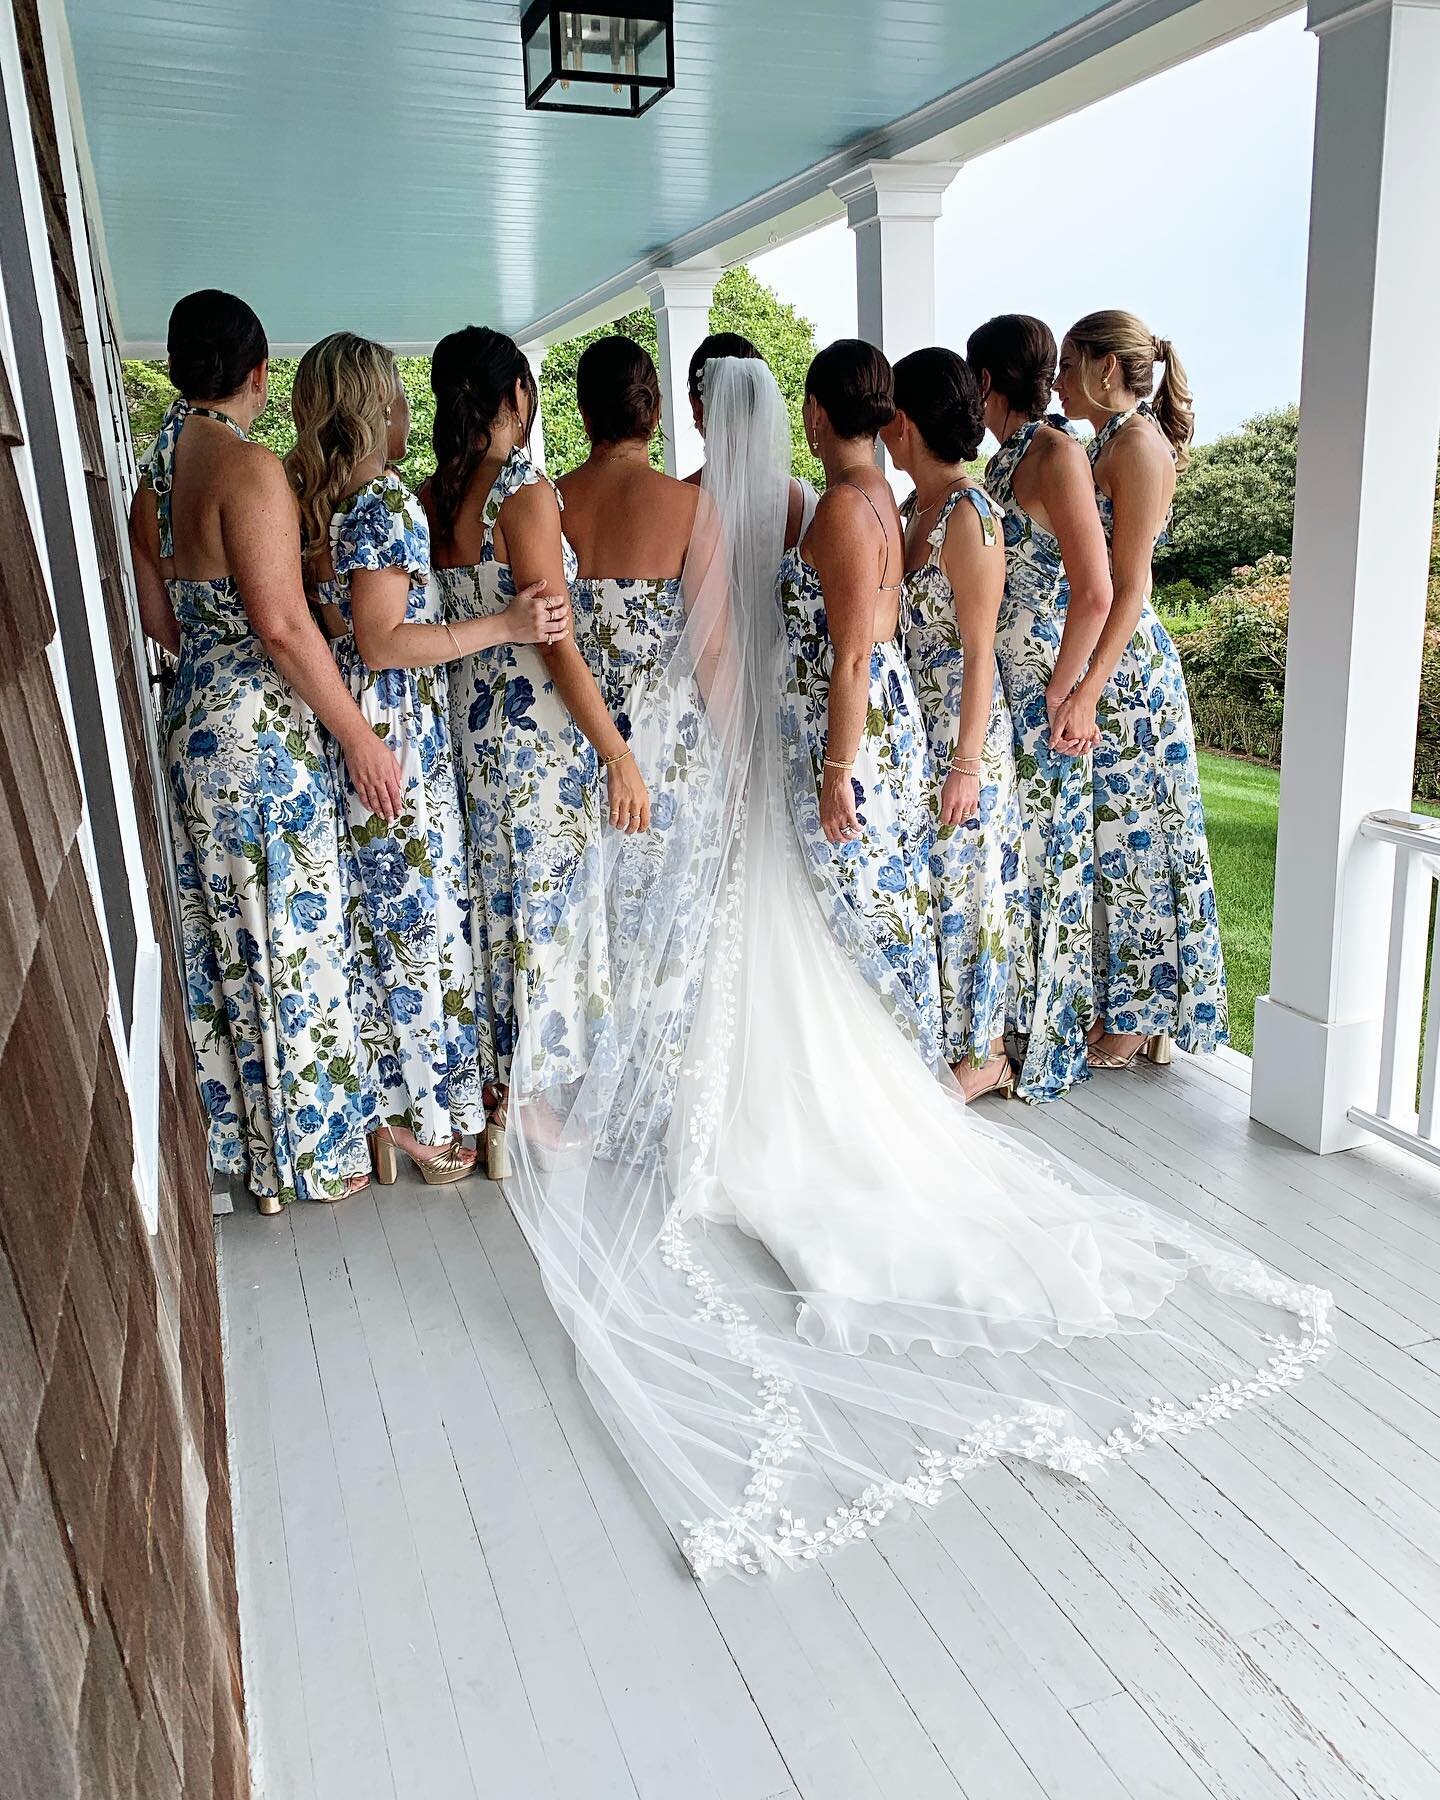 We love an on-site candid photo for the memories of your special day! 🤳🎞

Venue: @360east 🌊 
Hair + Makeup: @sincerelysomethingborrowed 🤍
Getting ready location: Amagansett @airbnb 
Photographer: @cappyhotchkiss 📸

Sincerely Something Borrowed |